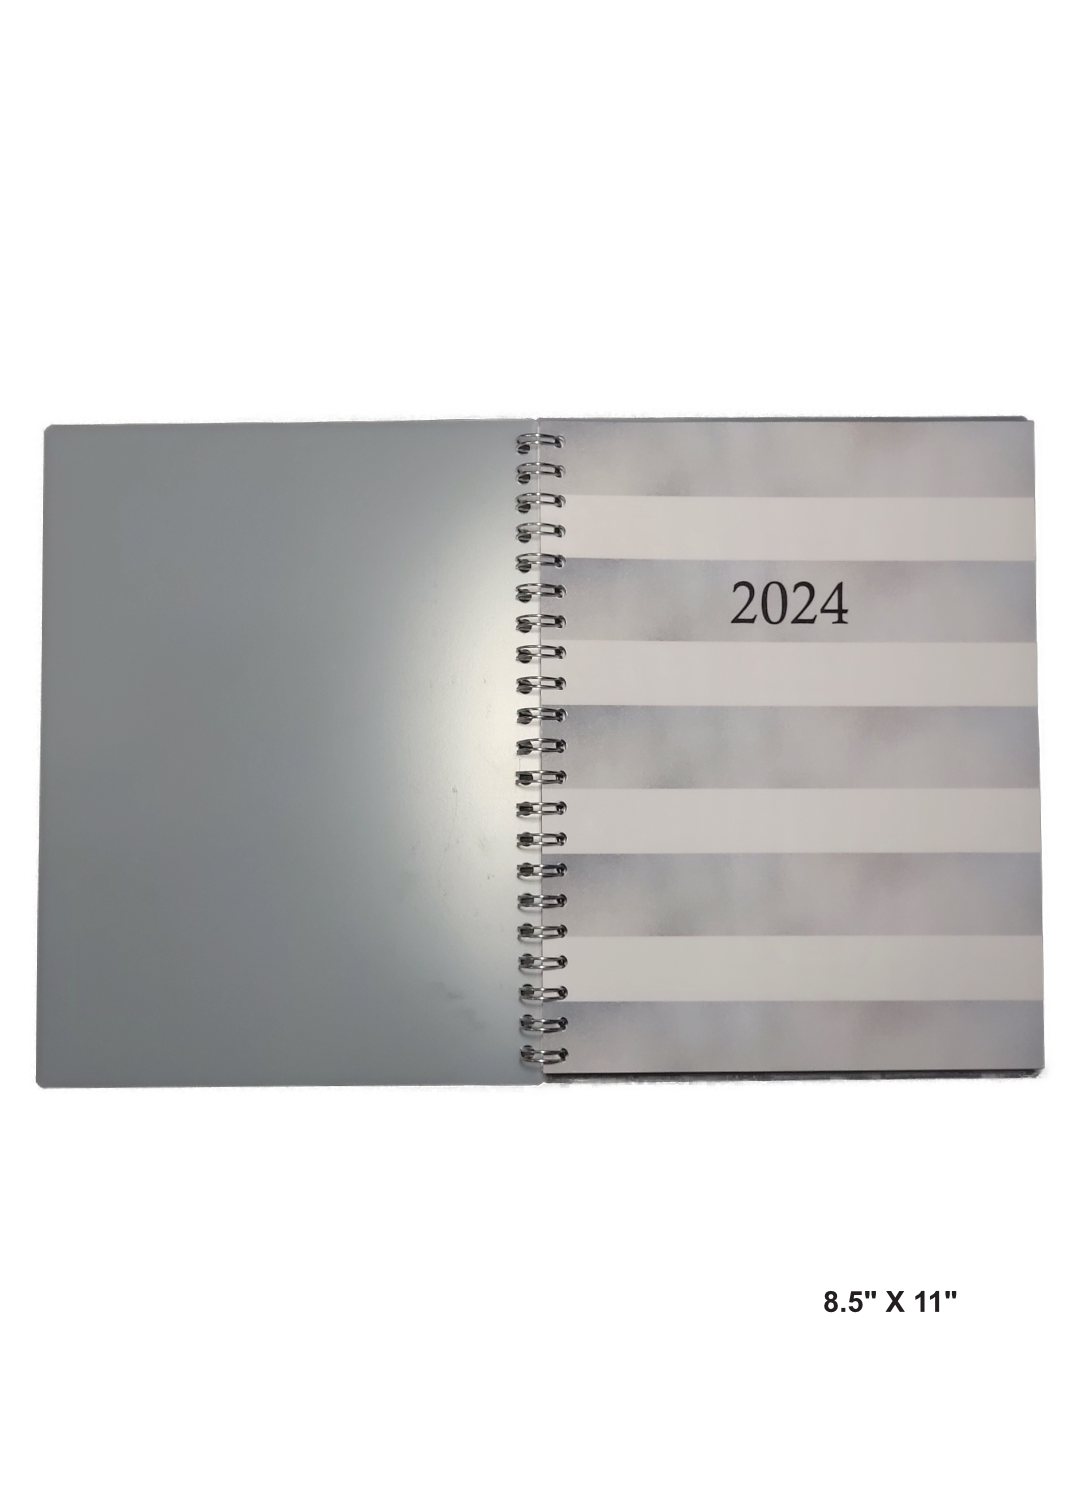 Image of a hand-made 8.5" x 11" 12-month planner with silver and white stripes. Great for planning and organization.